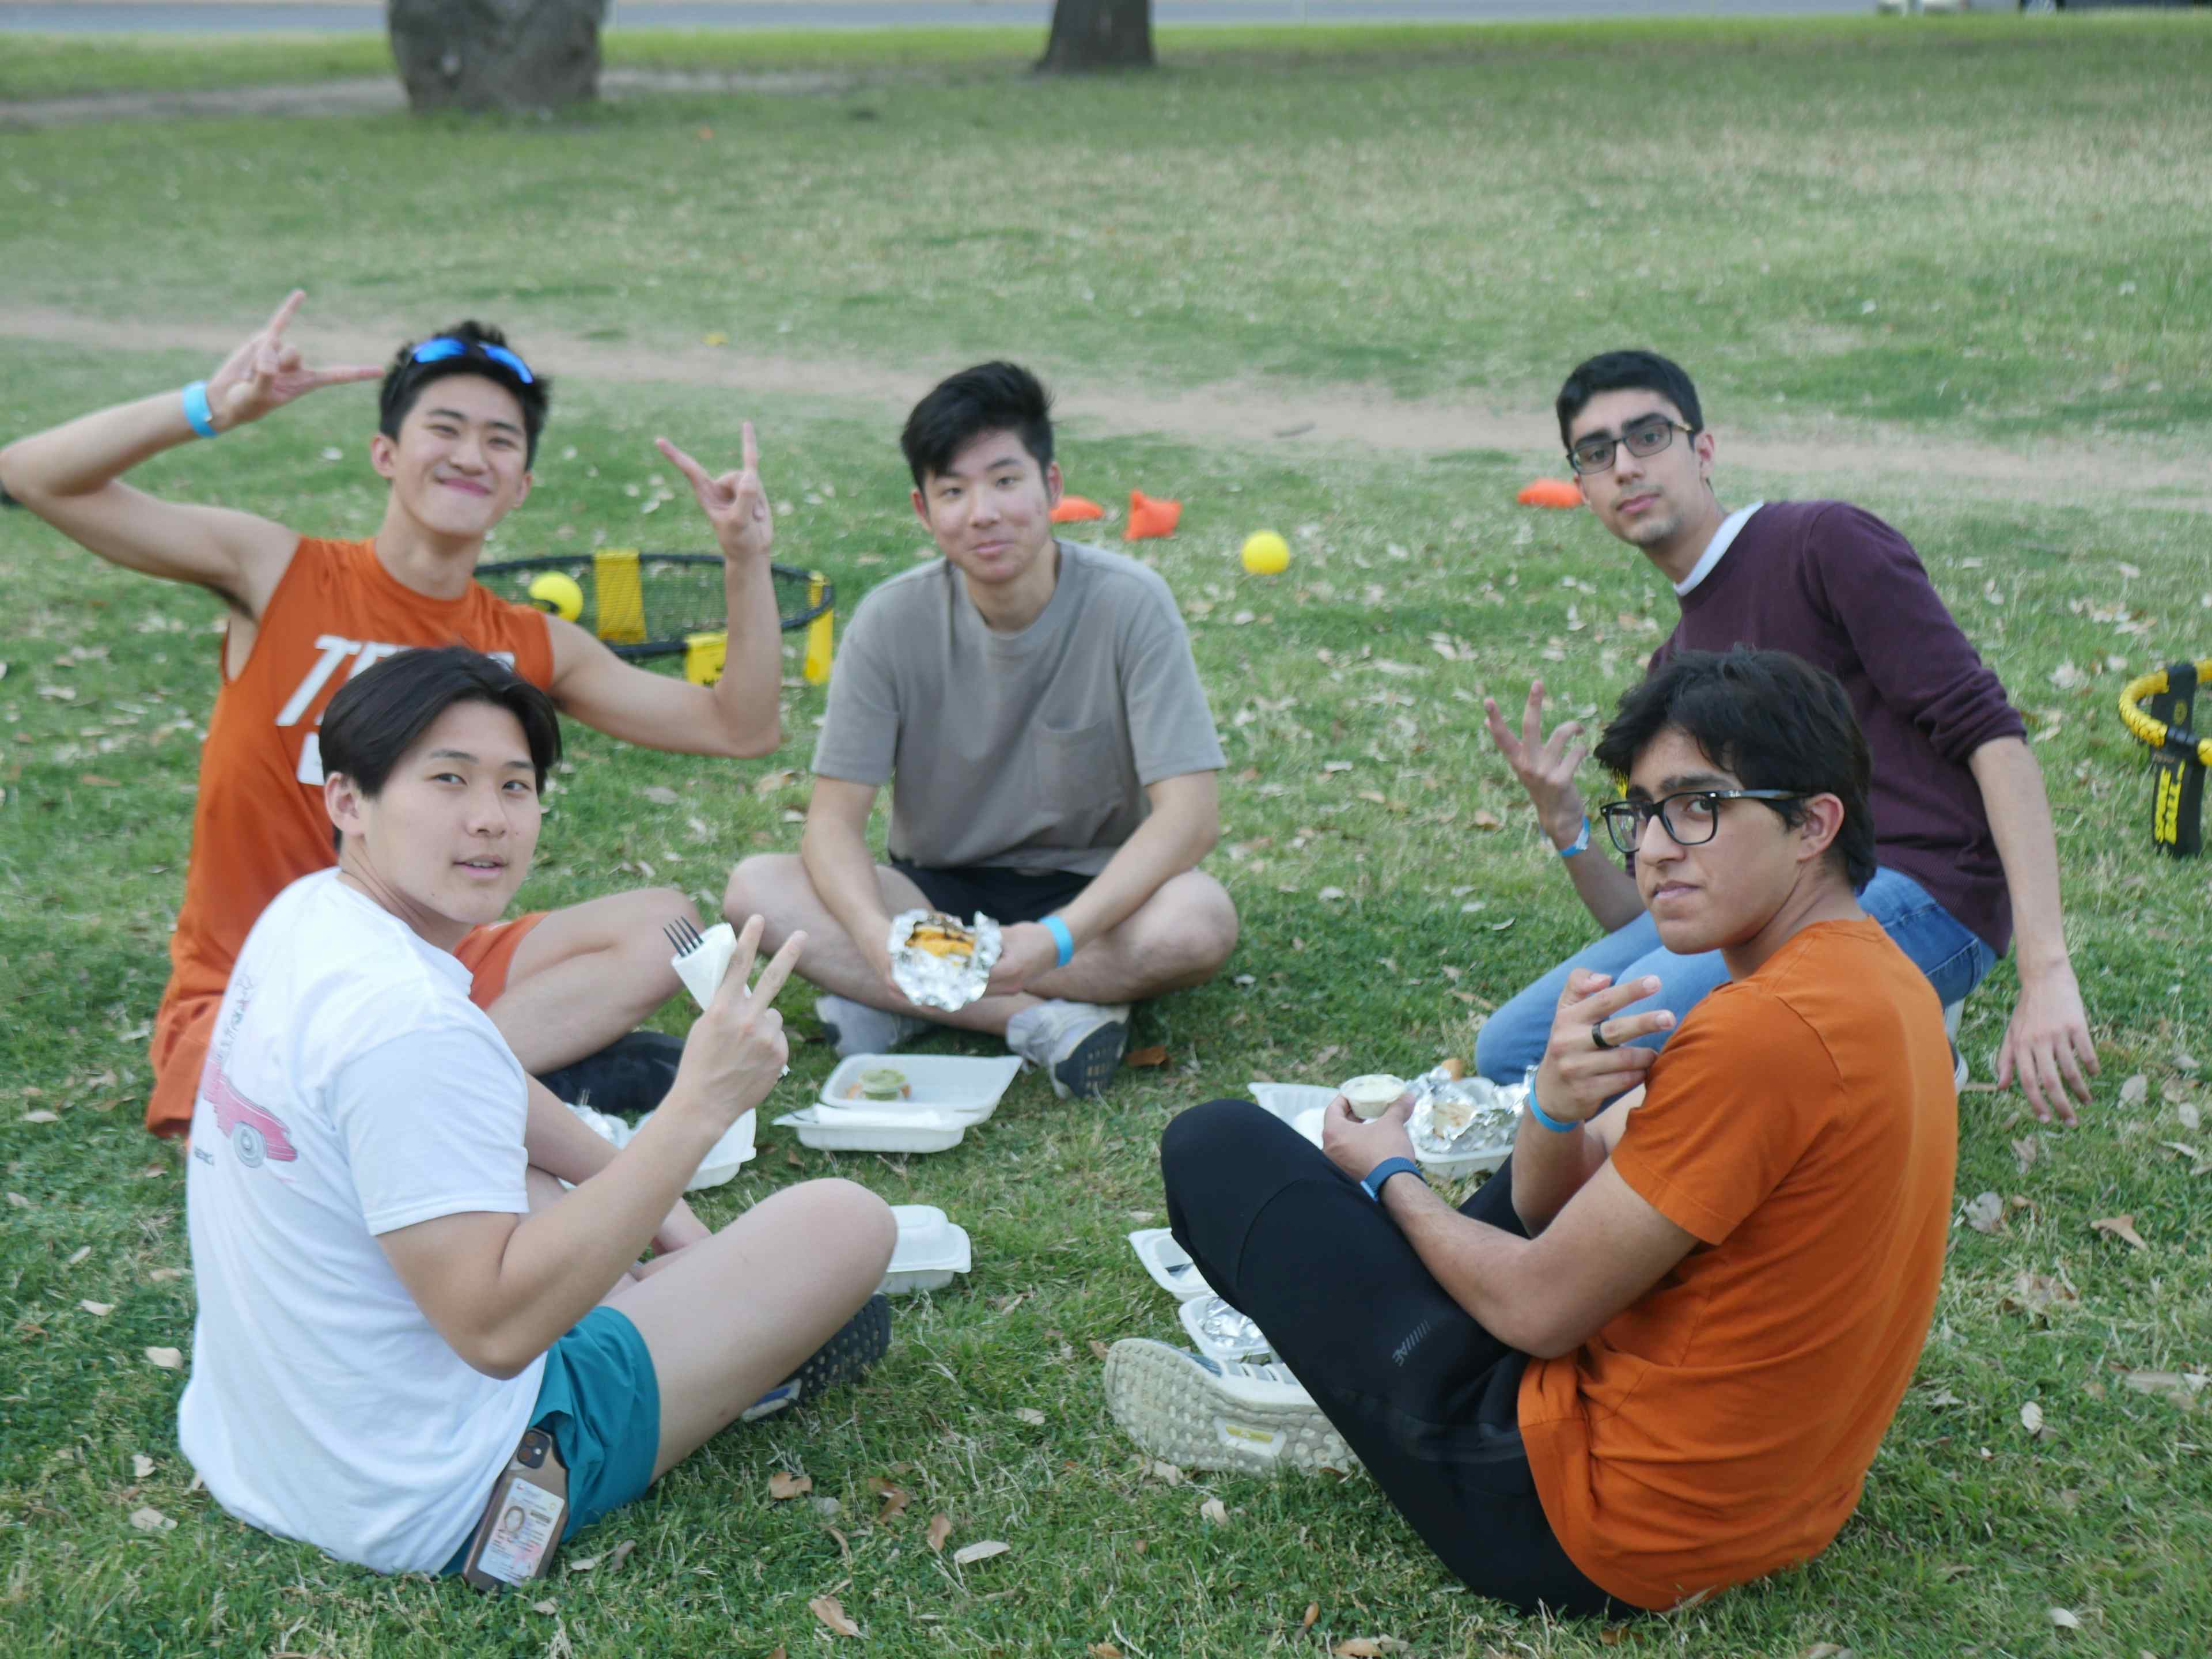 Members sit in circle on lawn smiling at the camera